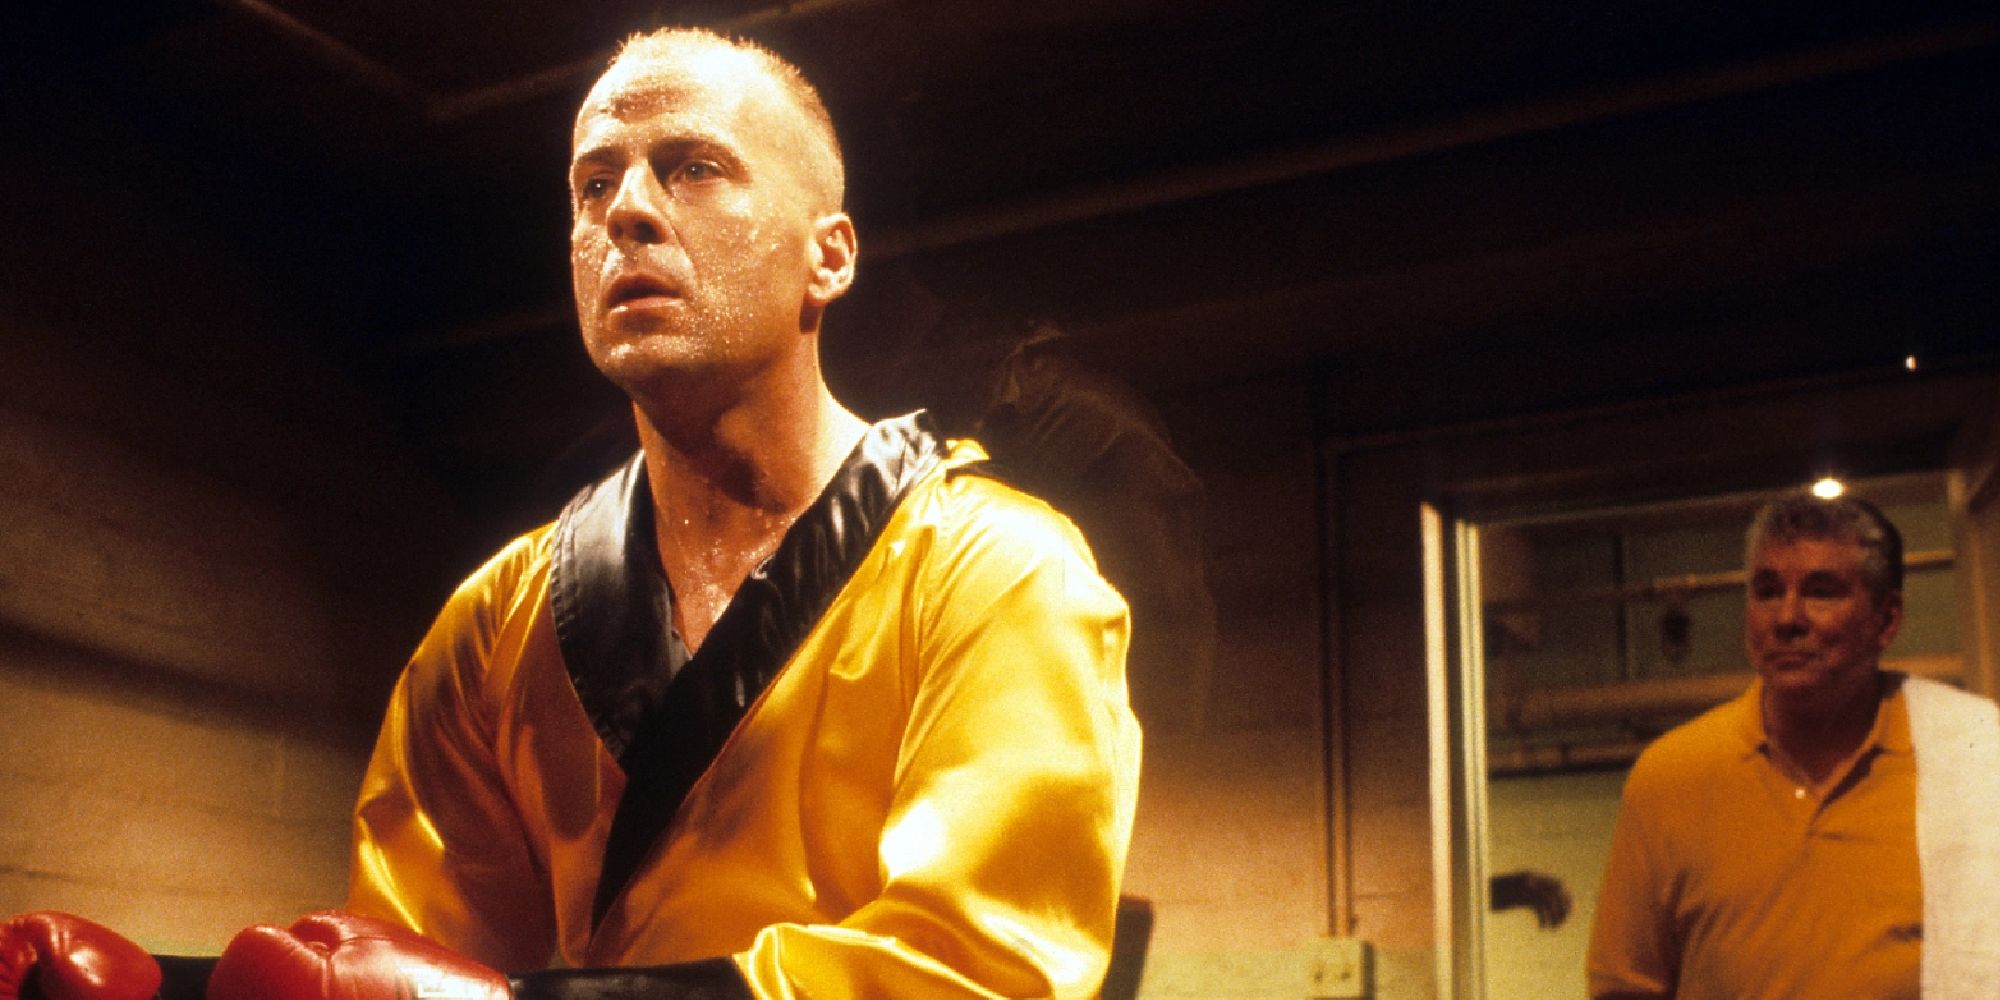 Bruce Willis as Butch Coolidge with his ring robe on